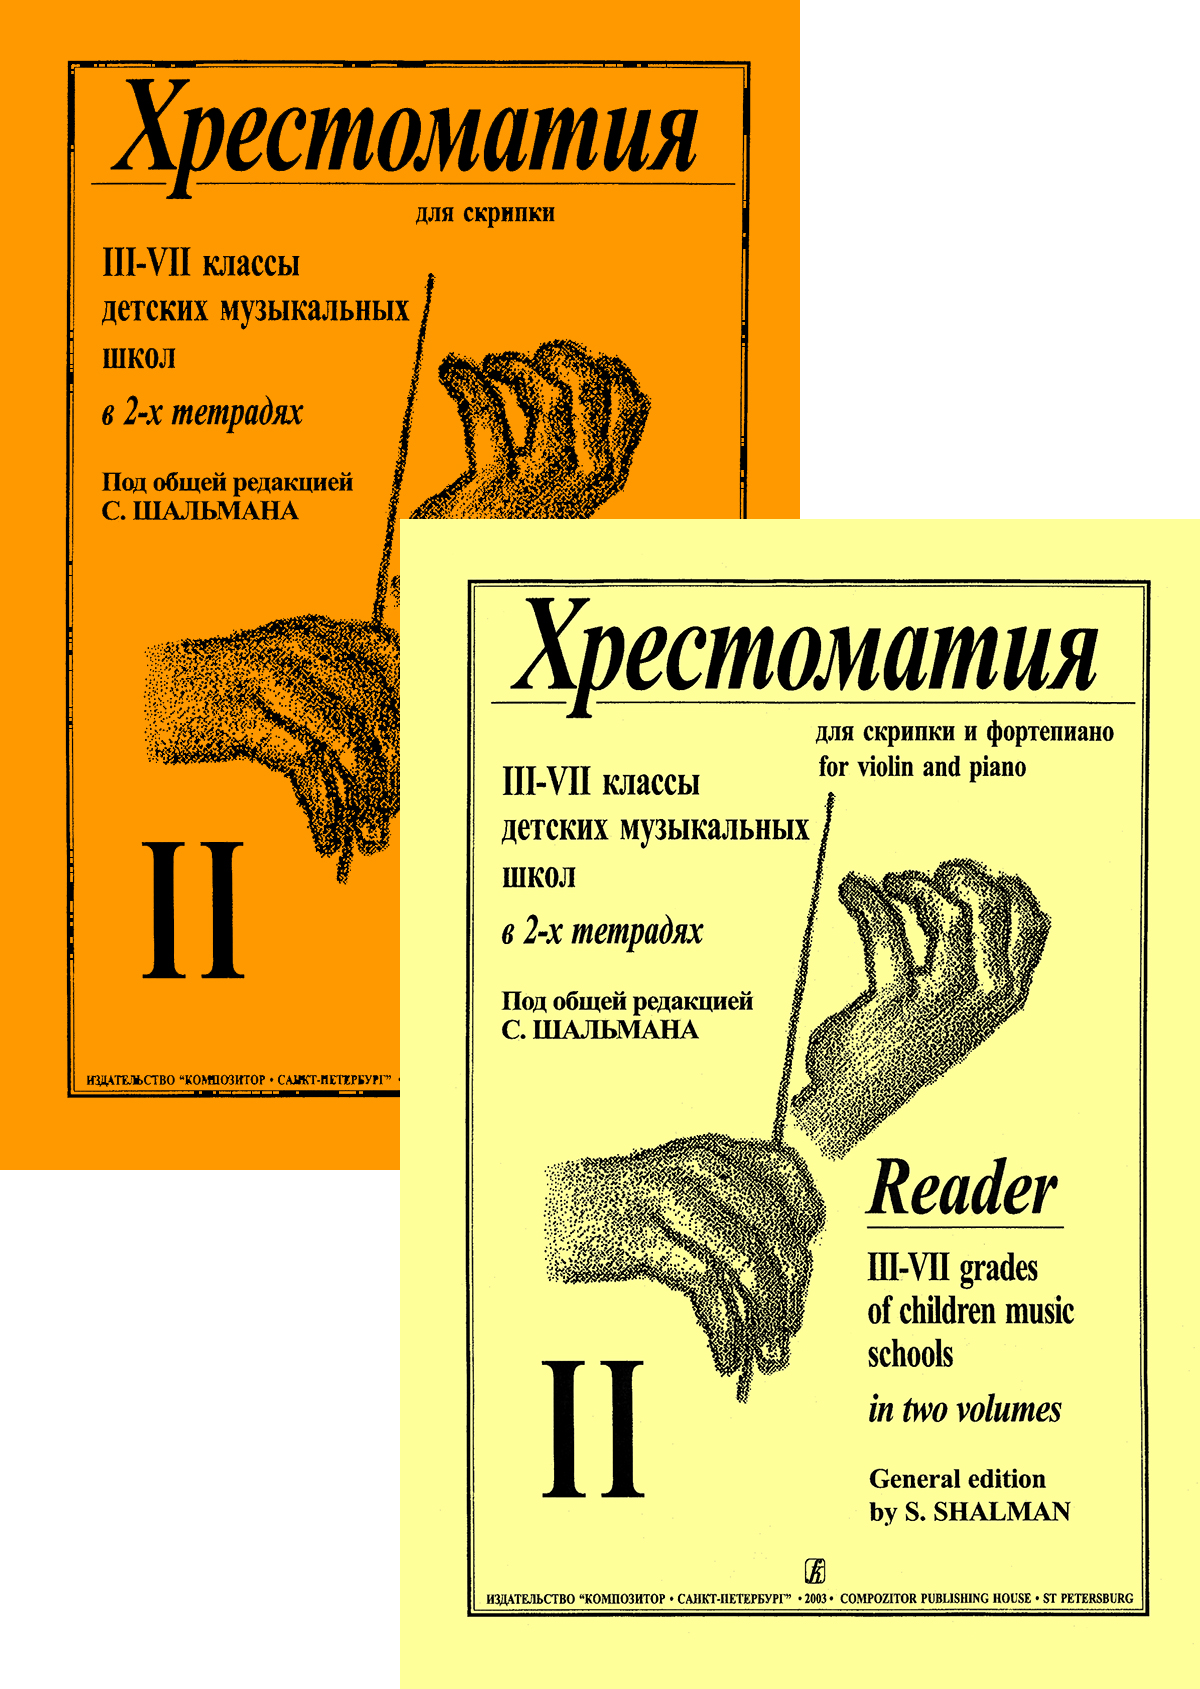 Schalman S. Сomp. Reader. Vol. 2. For 3–7 forms. For violin and piano. Score and part